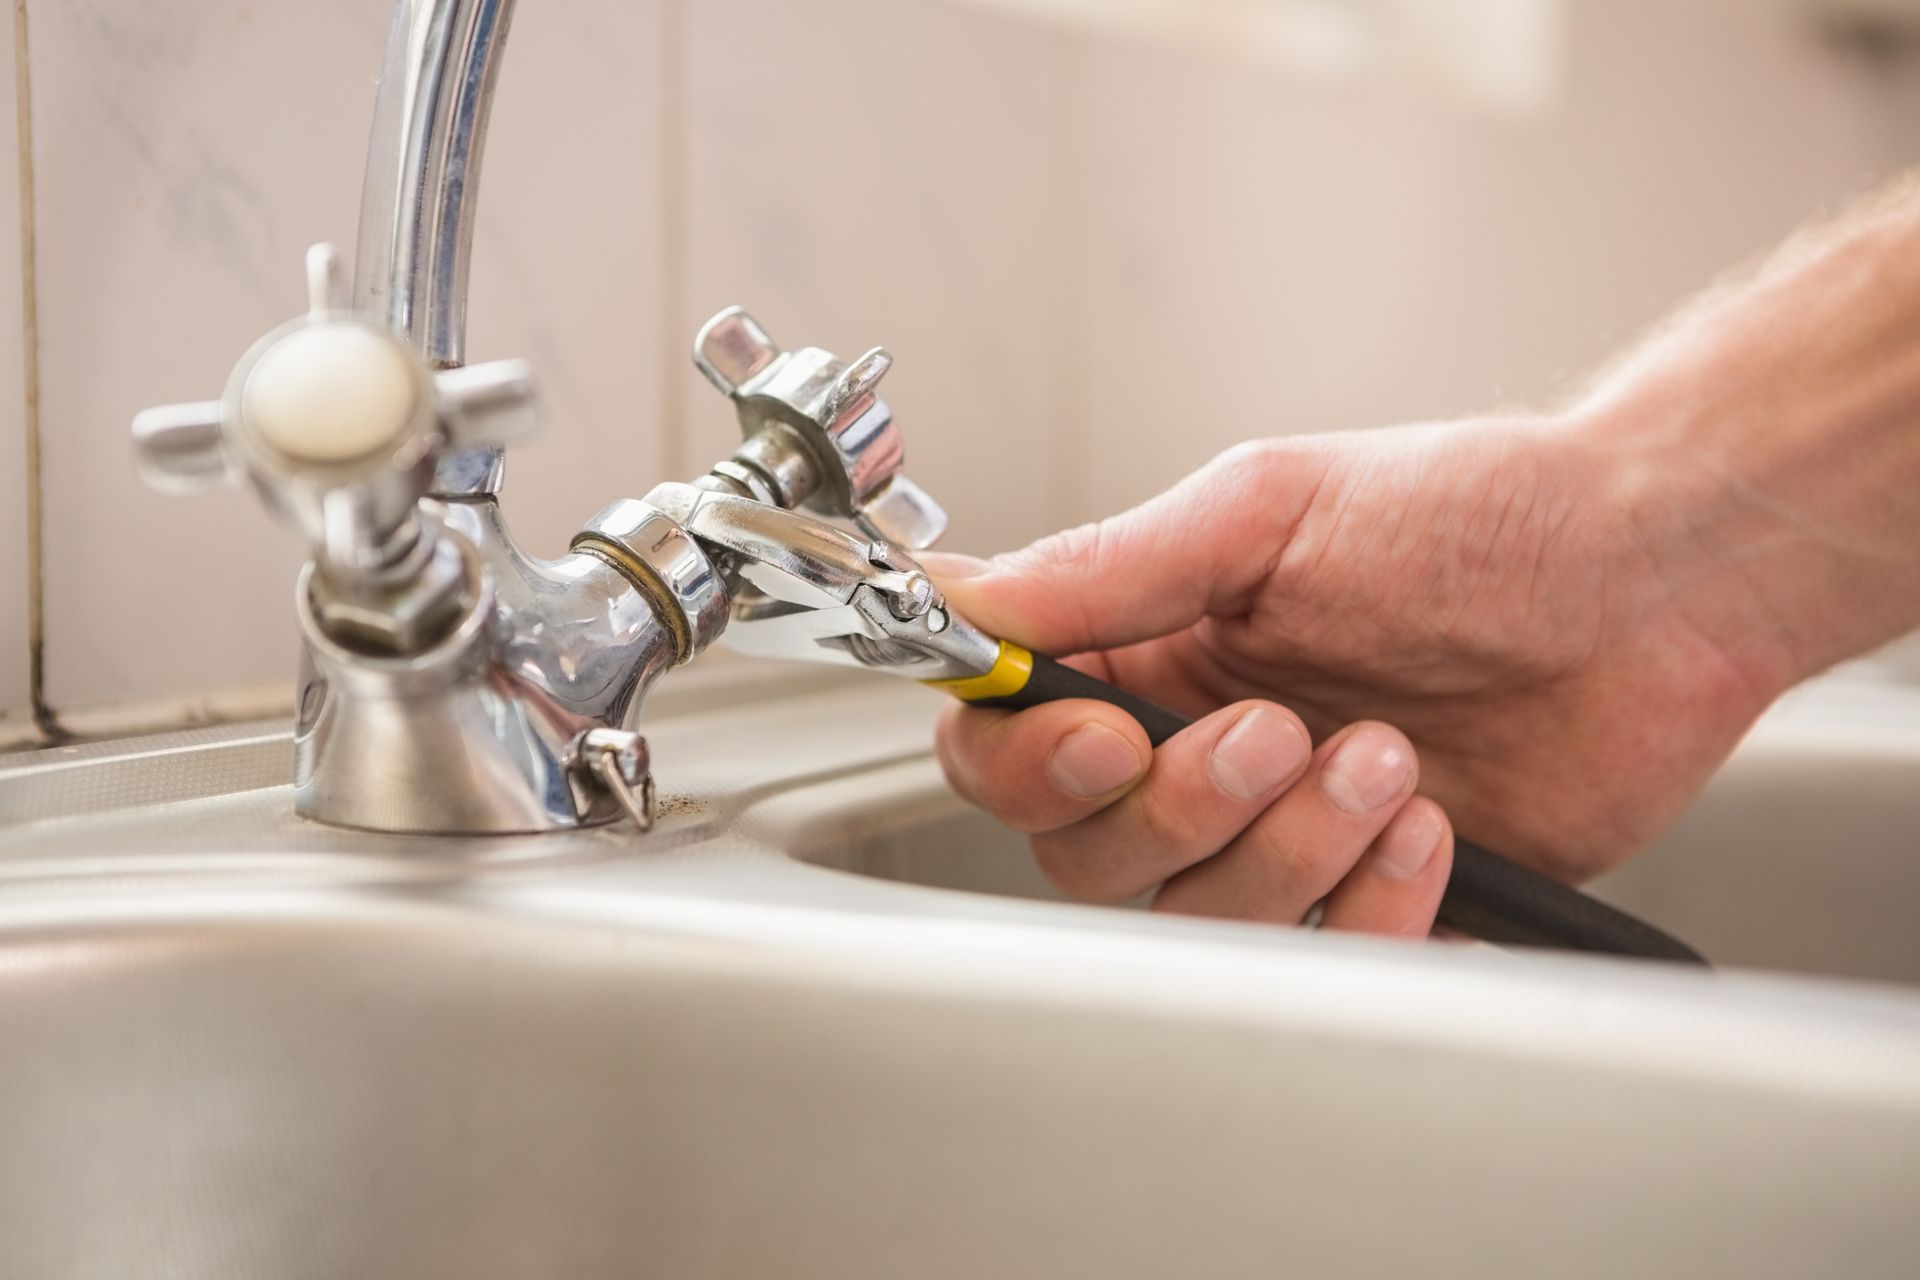 Tier One Plumbing solutions offers Faucet Repair & Installation servicing TN